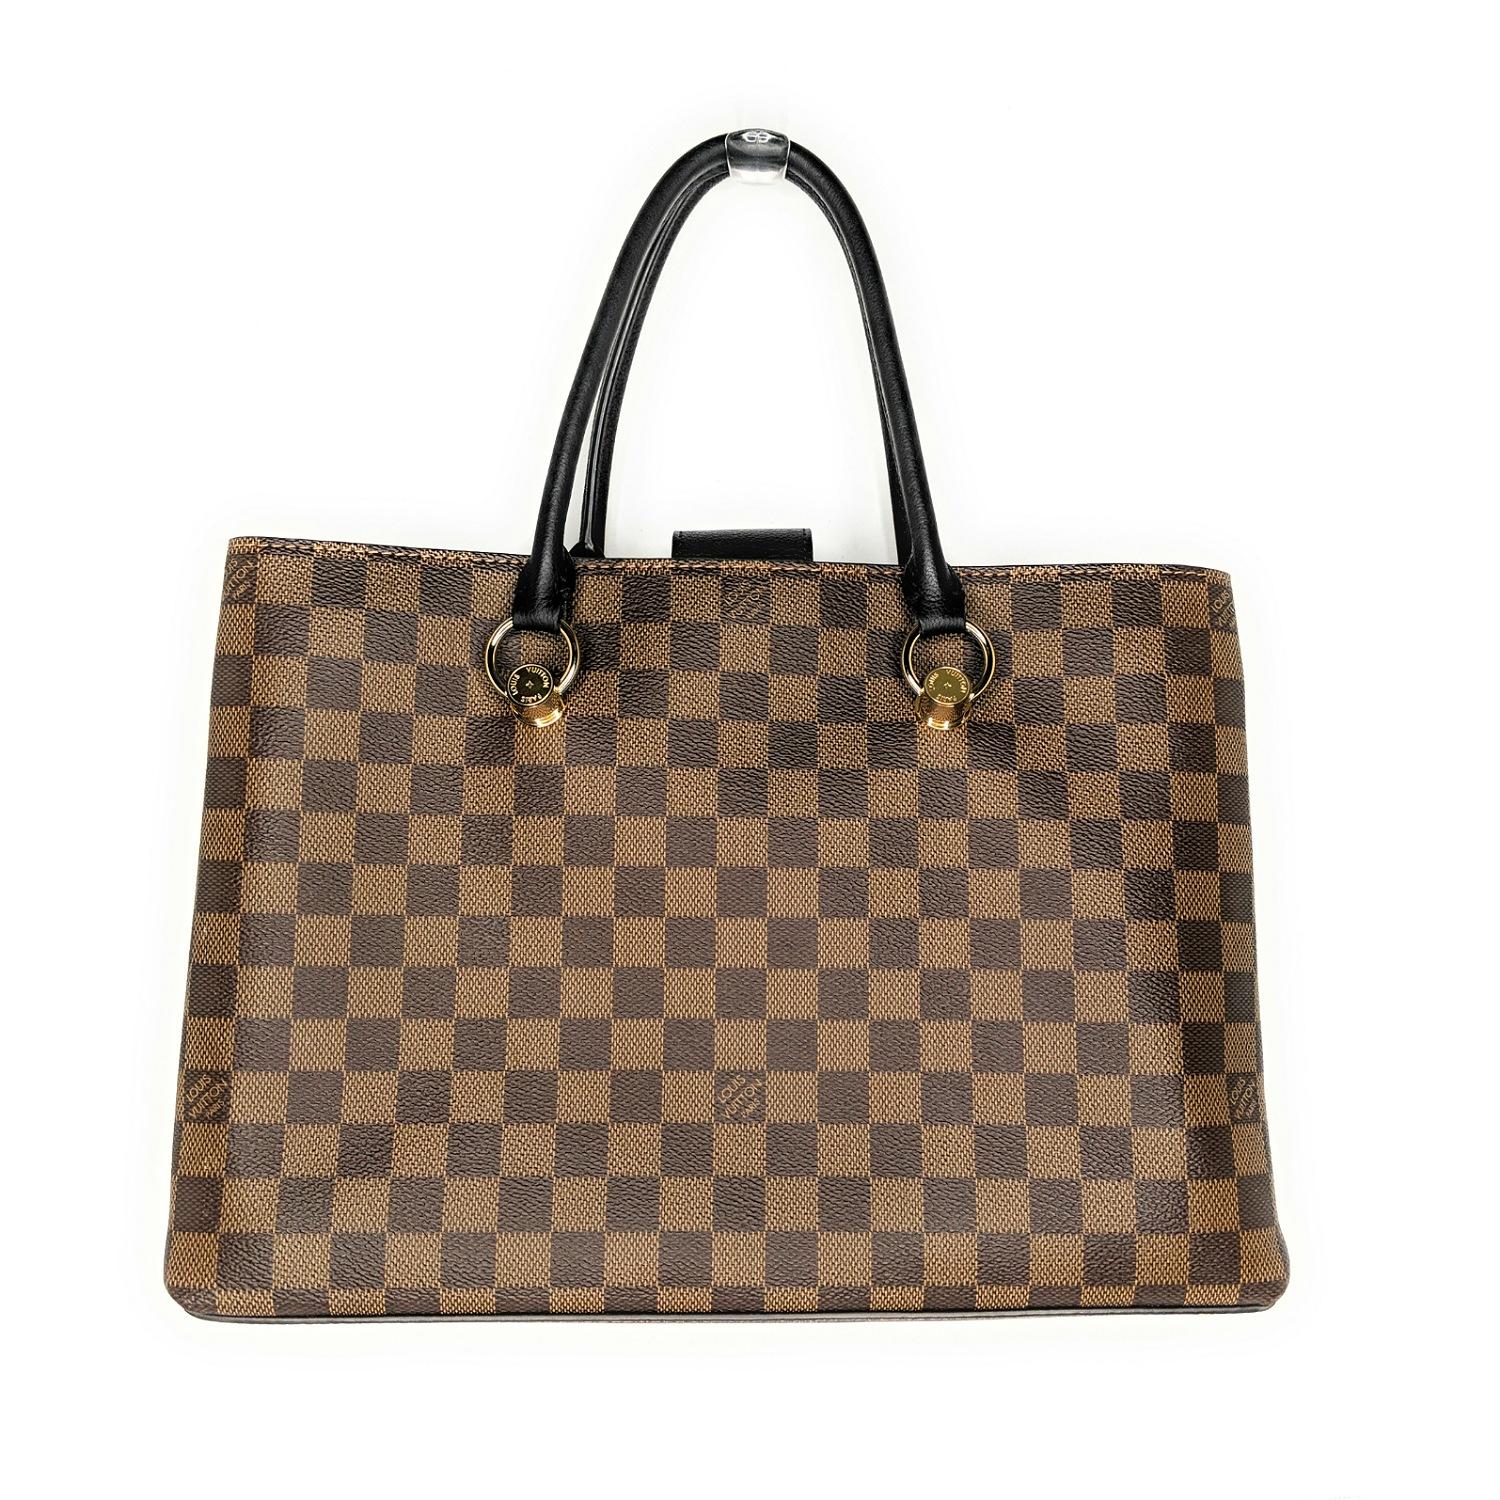 From the 2020 Collection. Brown and tan Damier Ebene coated canvas Louis Vuitton Riverside bag with brass hardware, dual rolled top handles, debossed logo and logo charm at front, black leather trim, protective feet at base, tonal Alcantara lining,